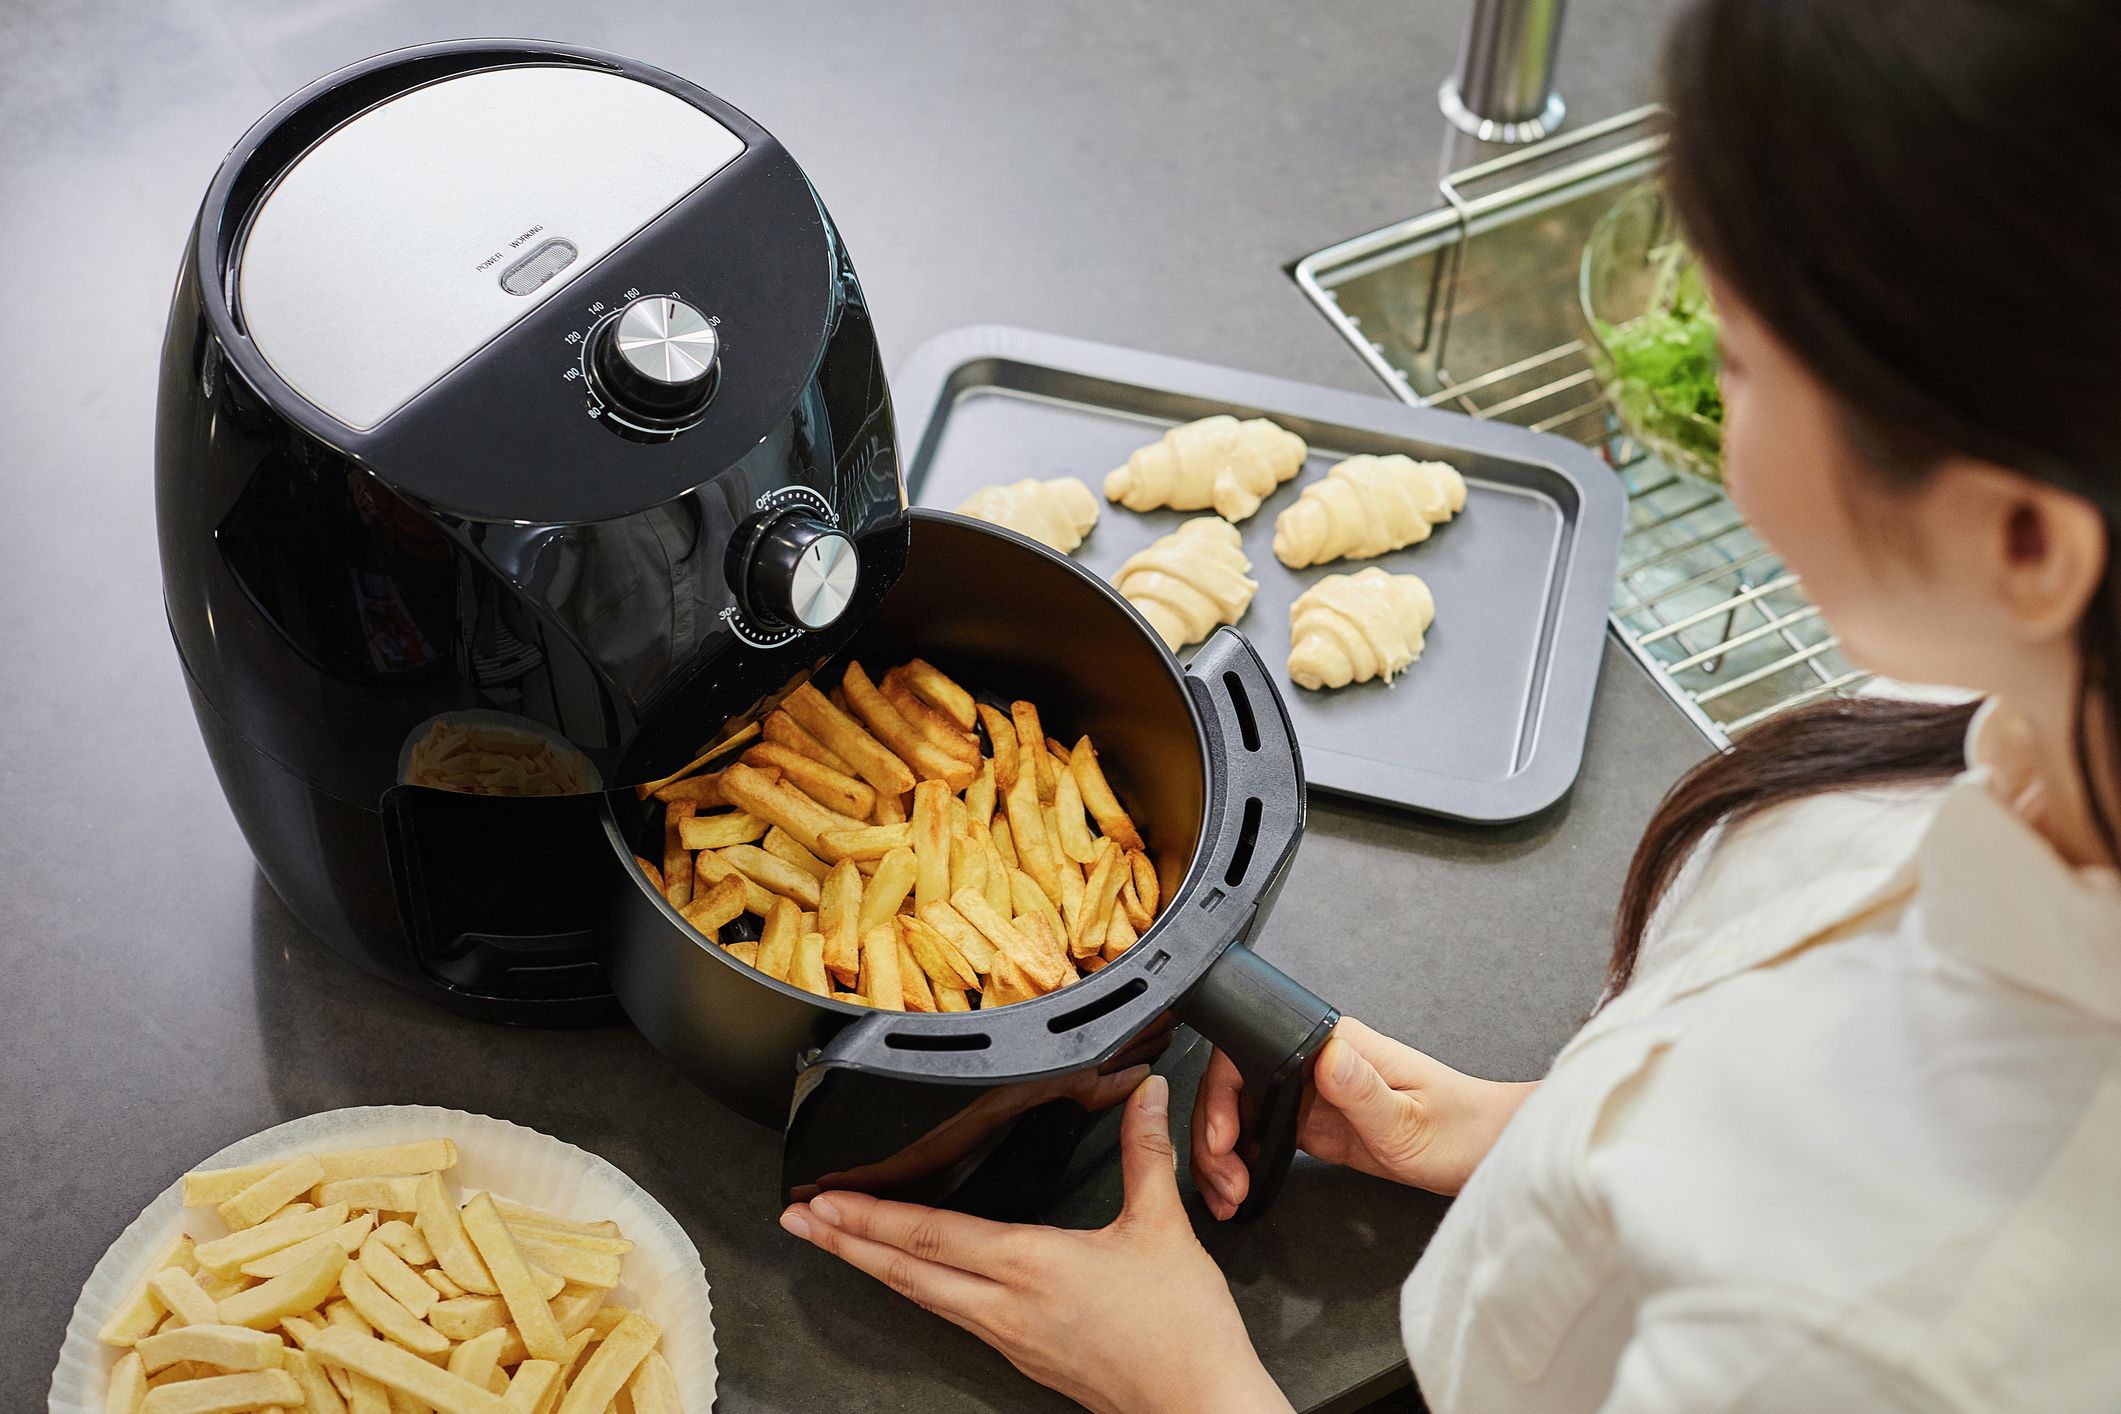 Air Fryer Safety Tips: How to Operate an Air Fryer